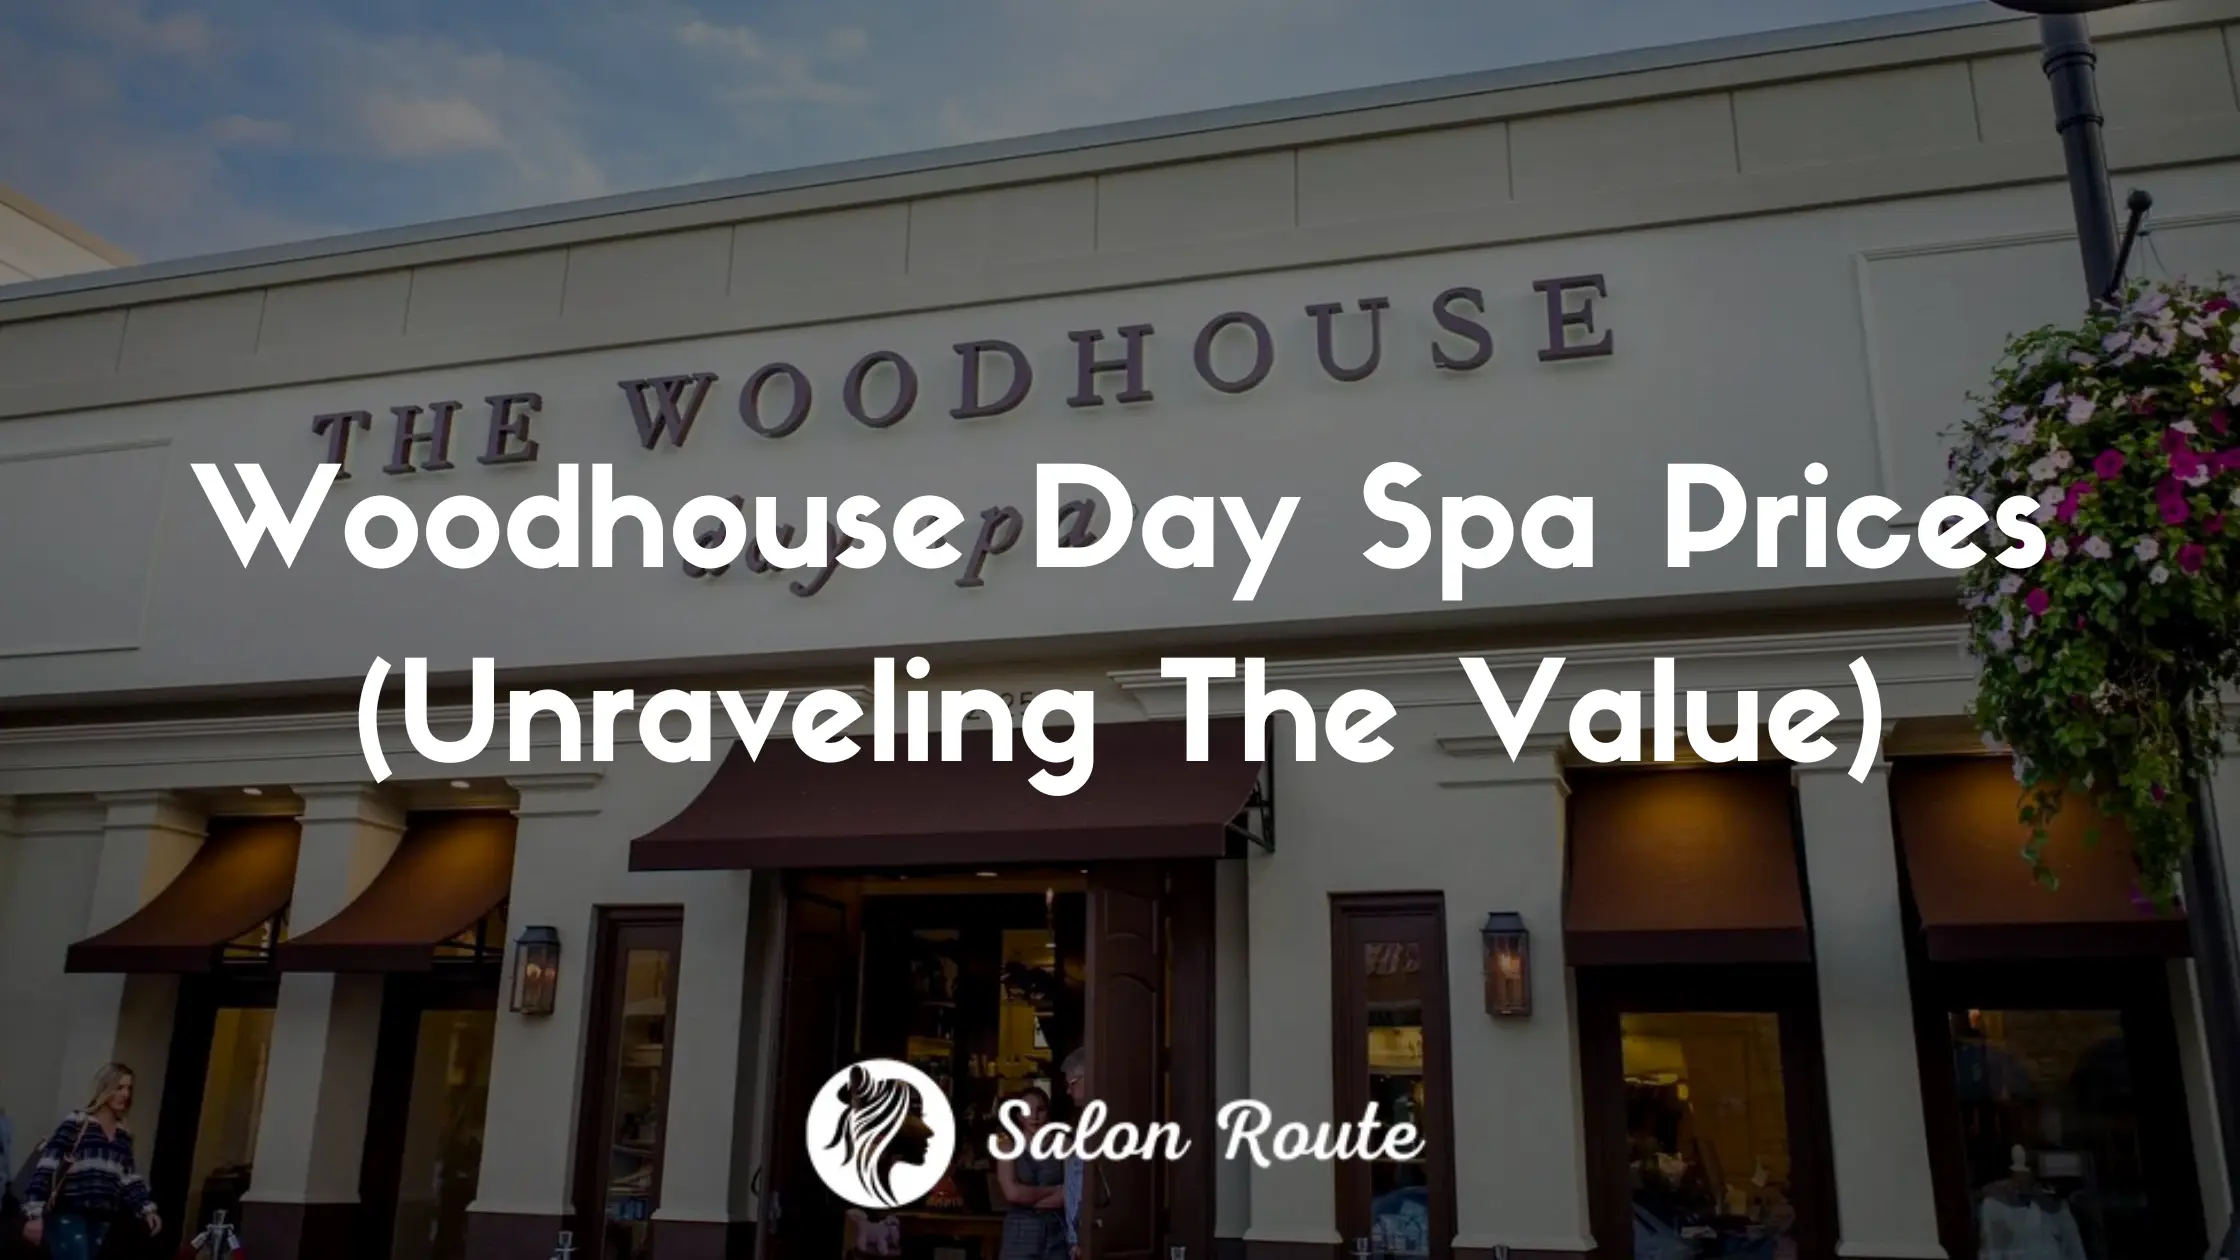 Woodhouse Day Spa Prices (Unraveling The Value)